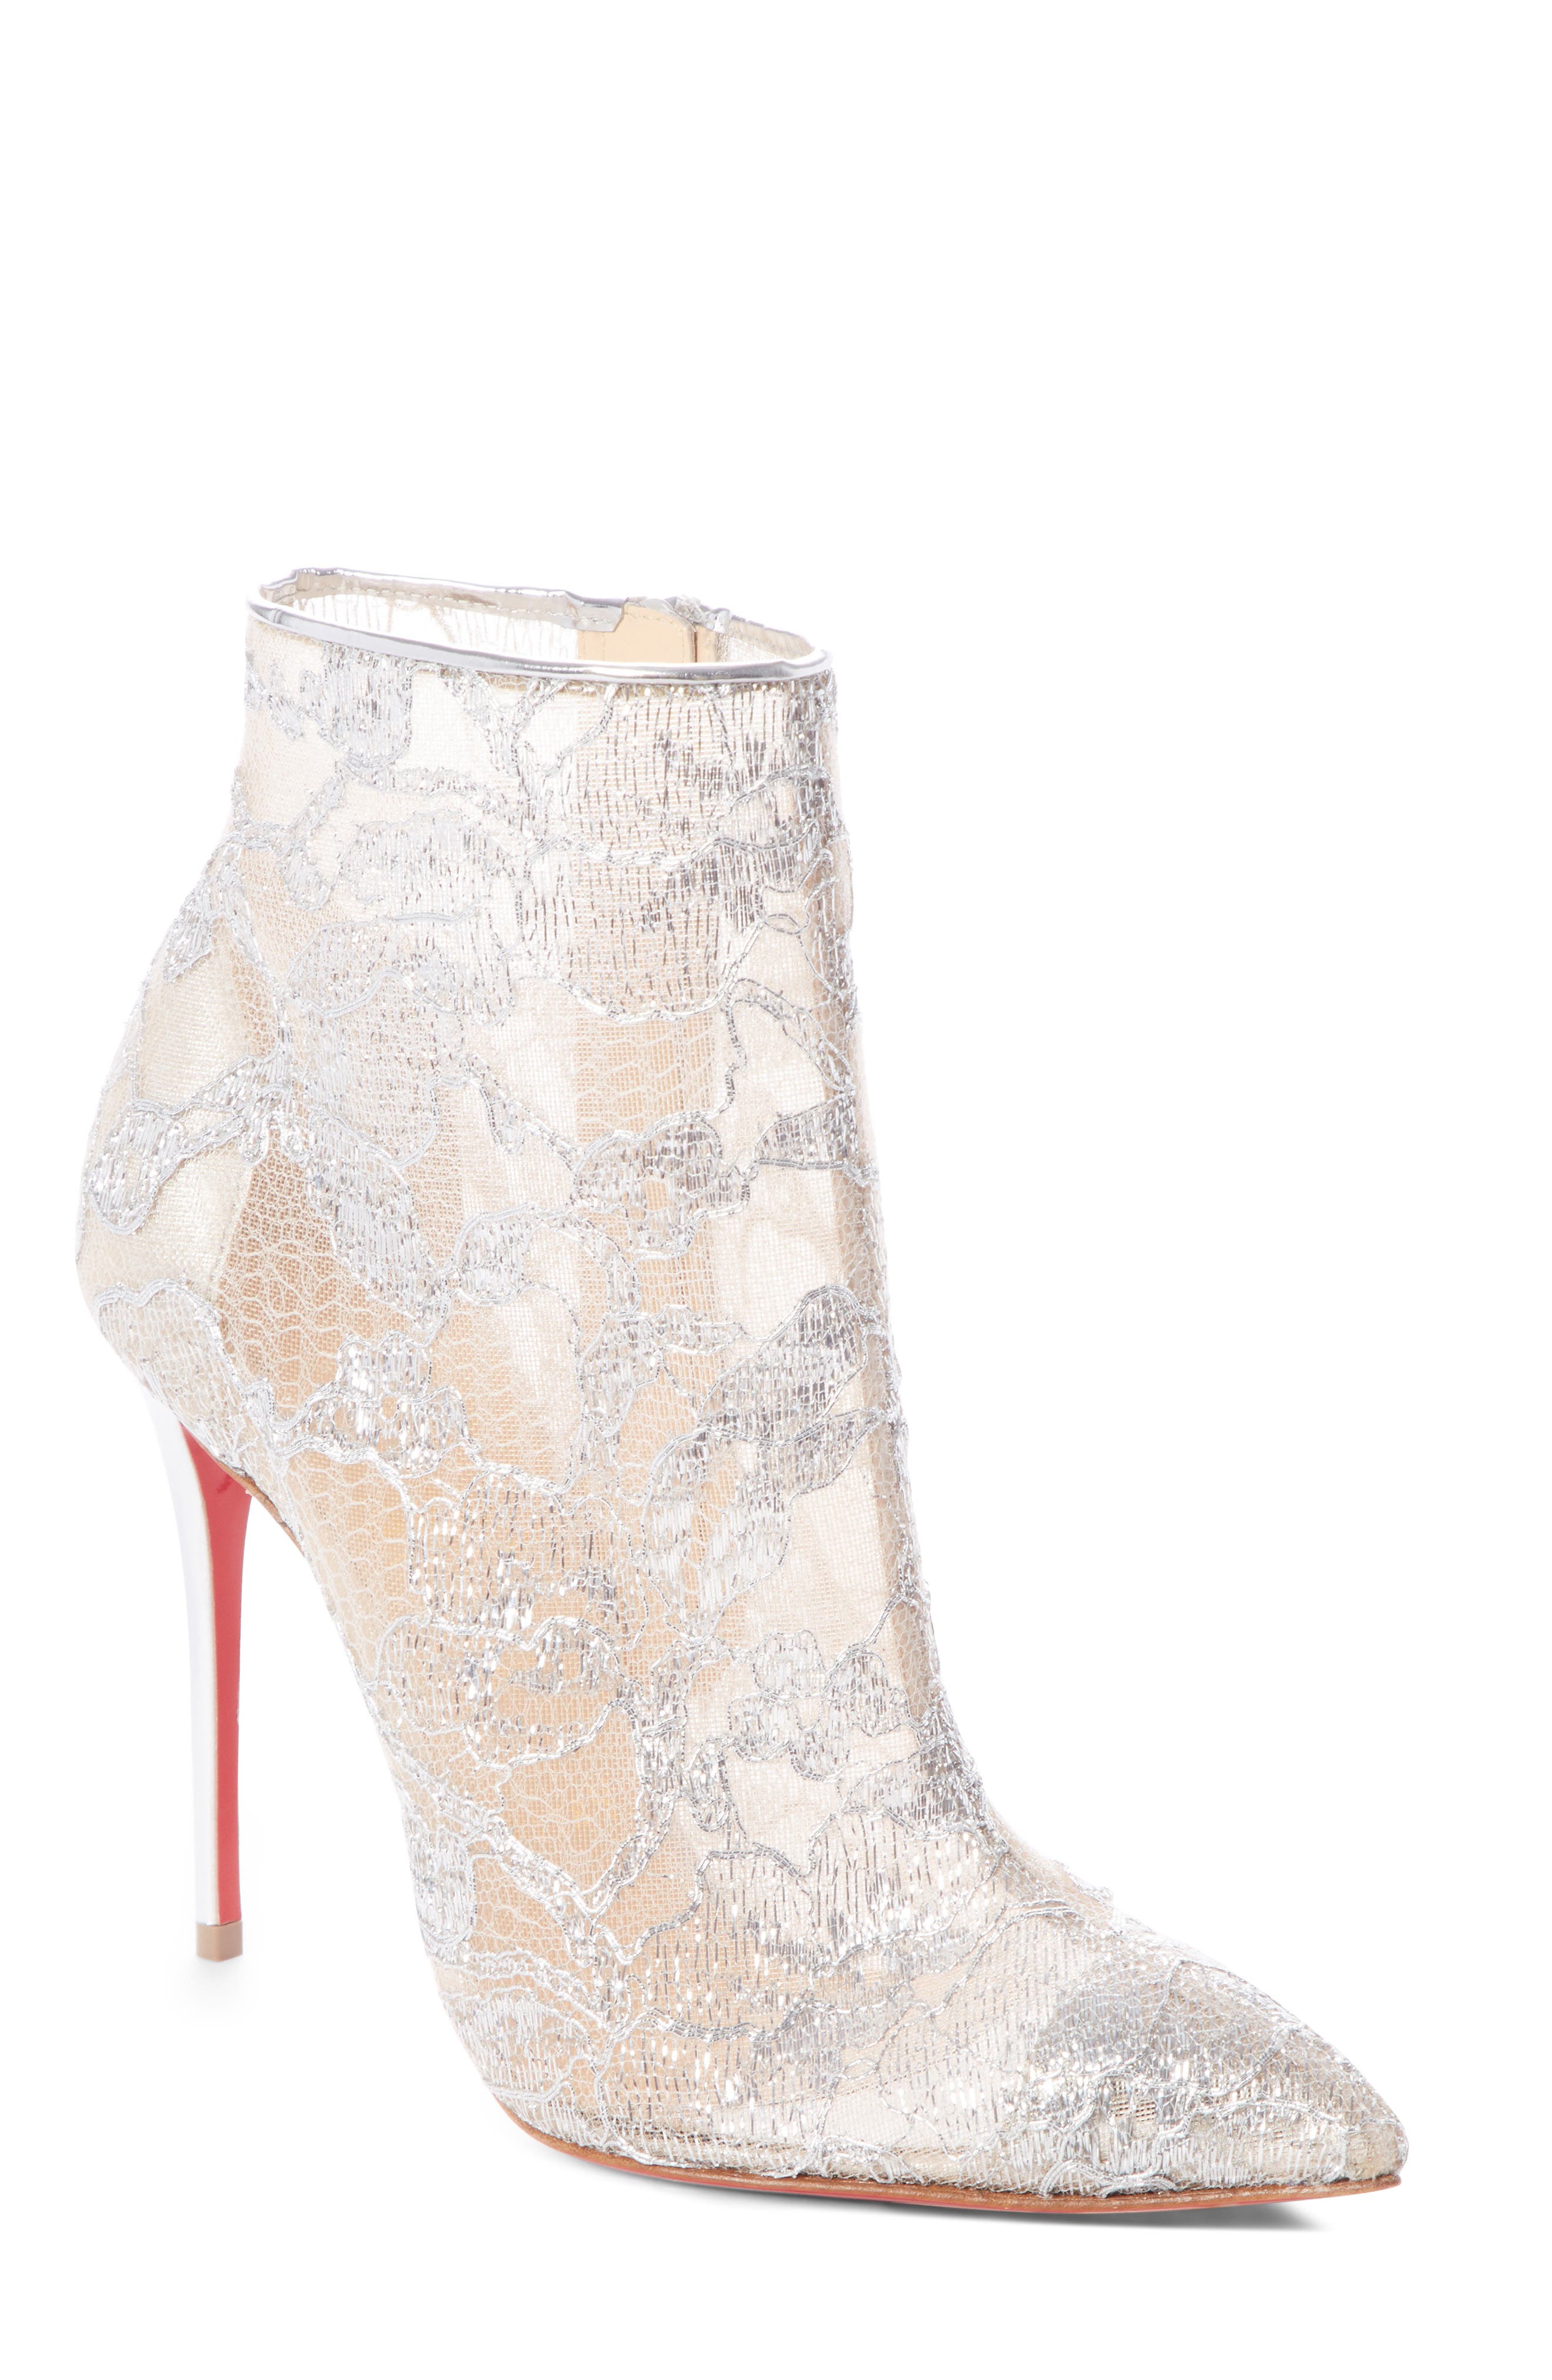 lace louboutin booties